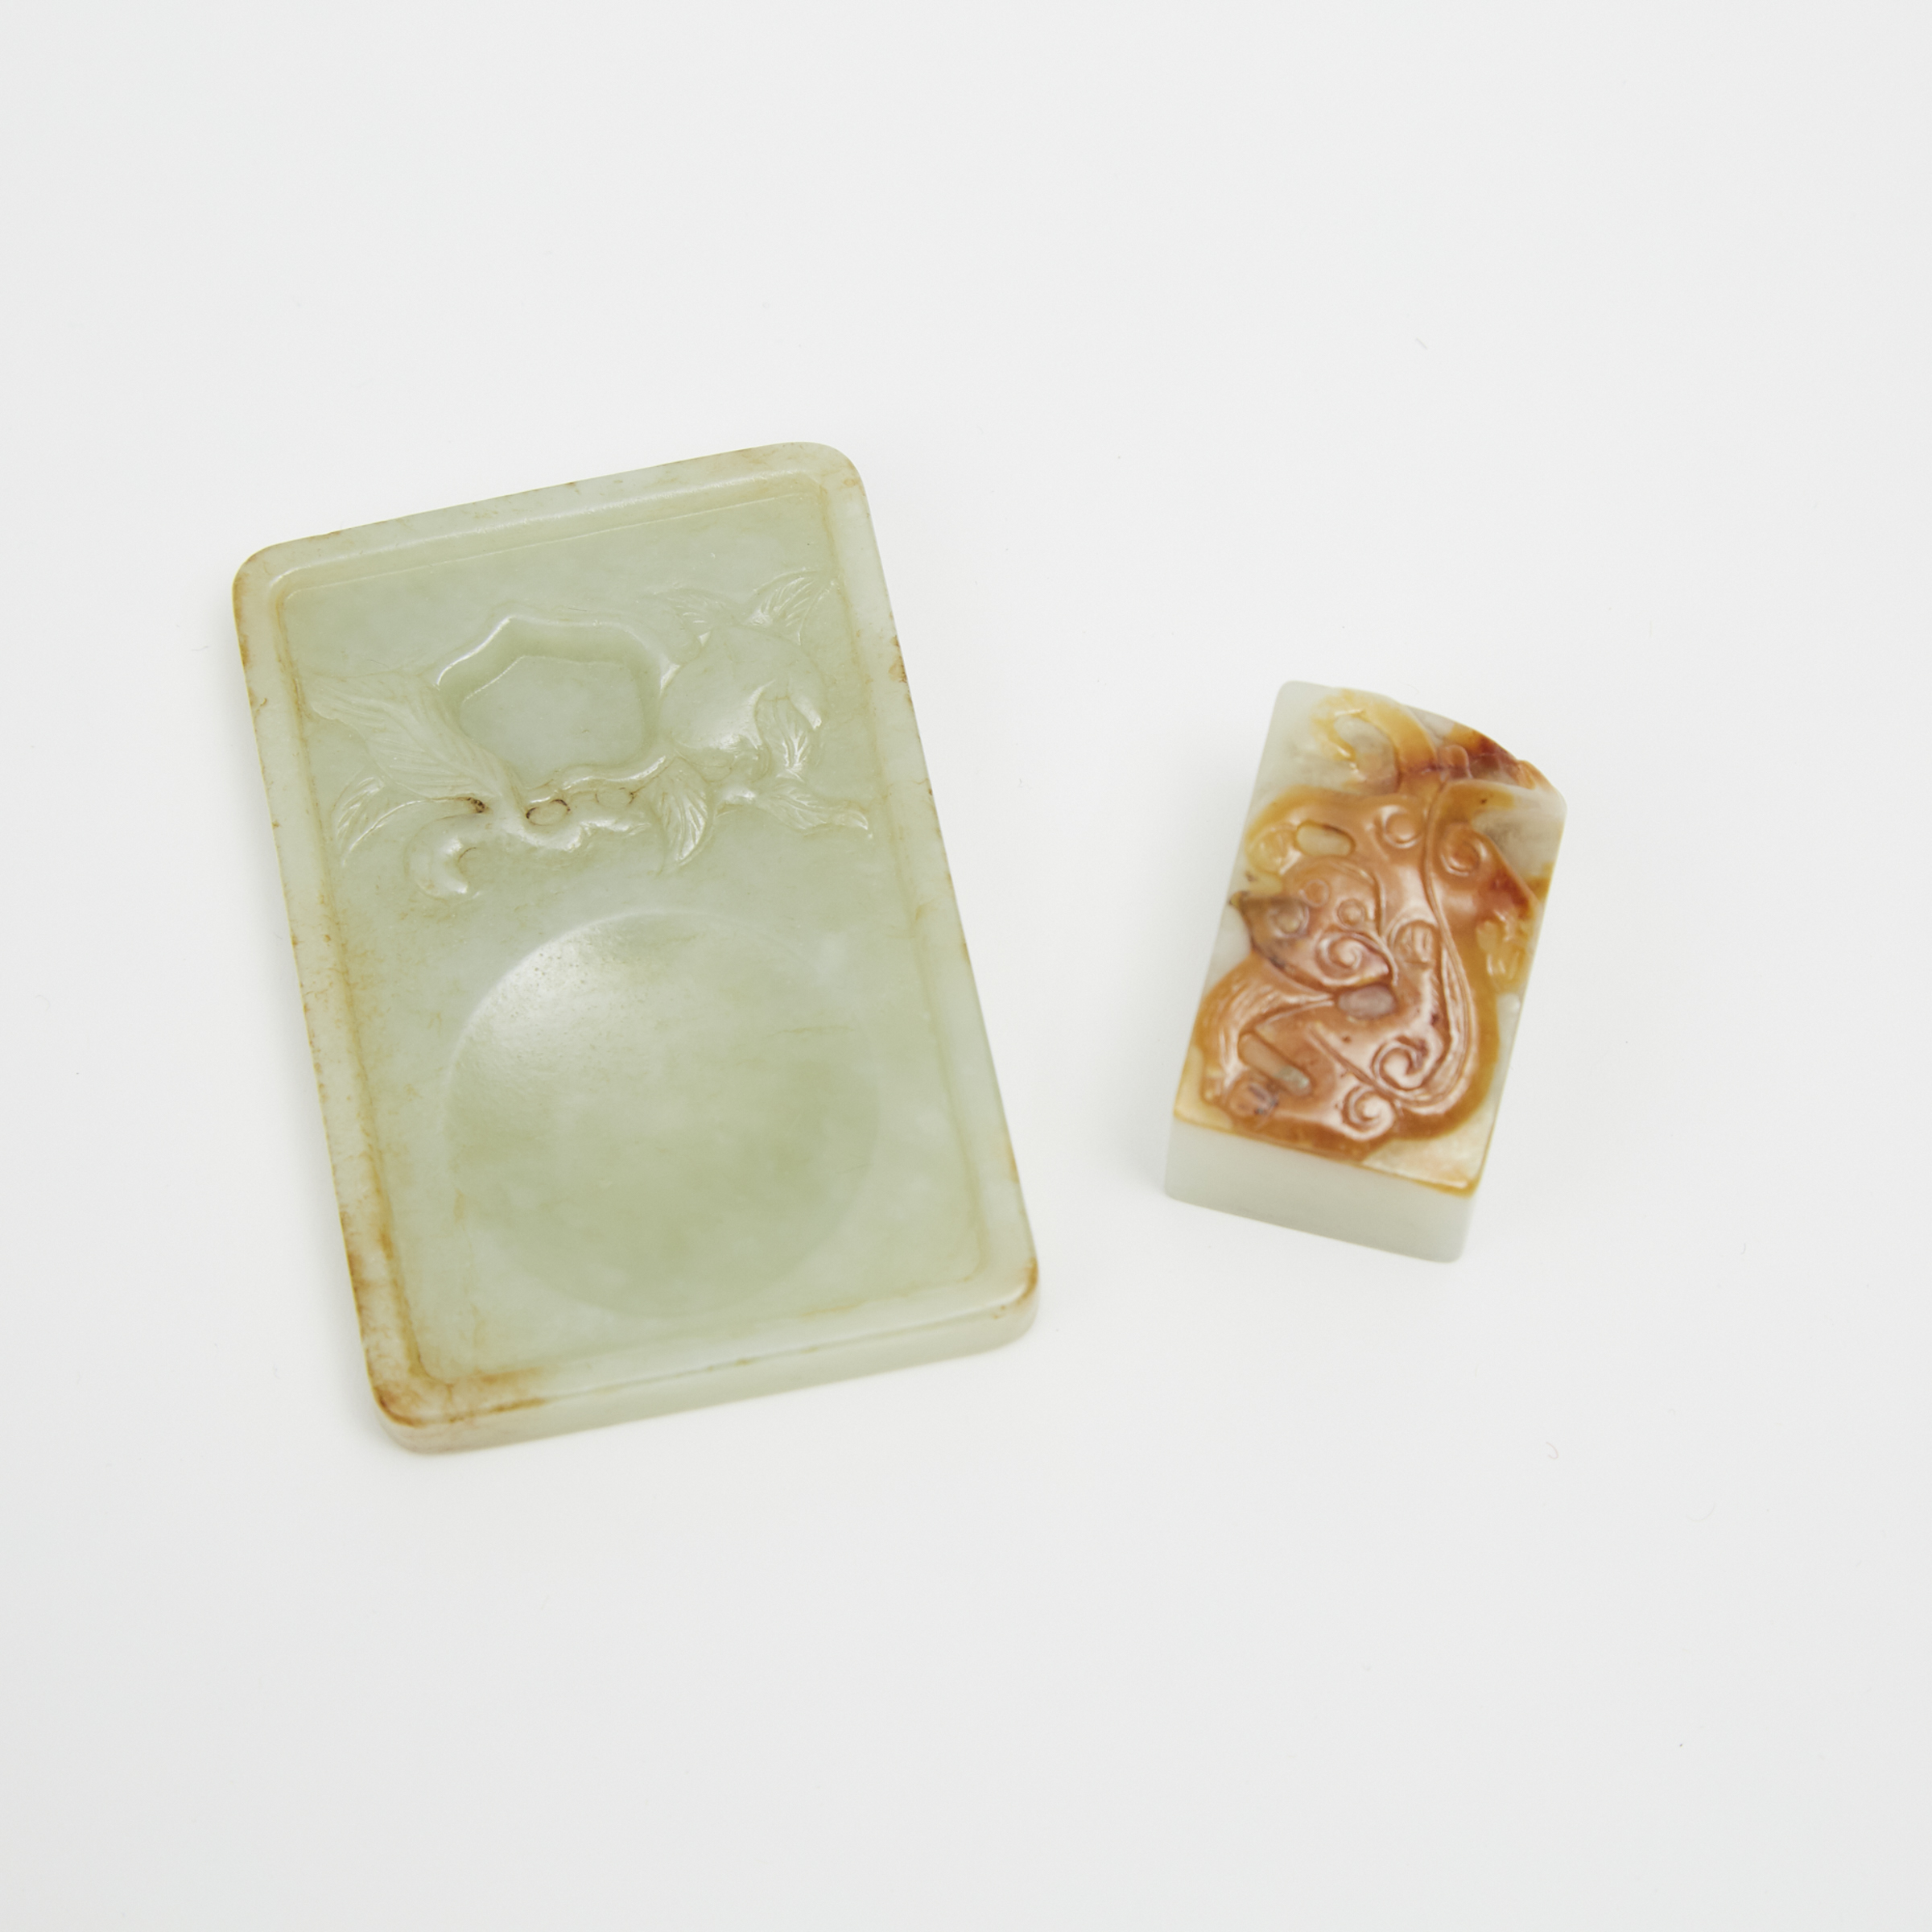 A Pale Celadon Jade Inkstone and a White Jade and Russet 'Chi-Dragon' Seal